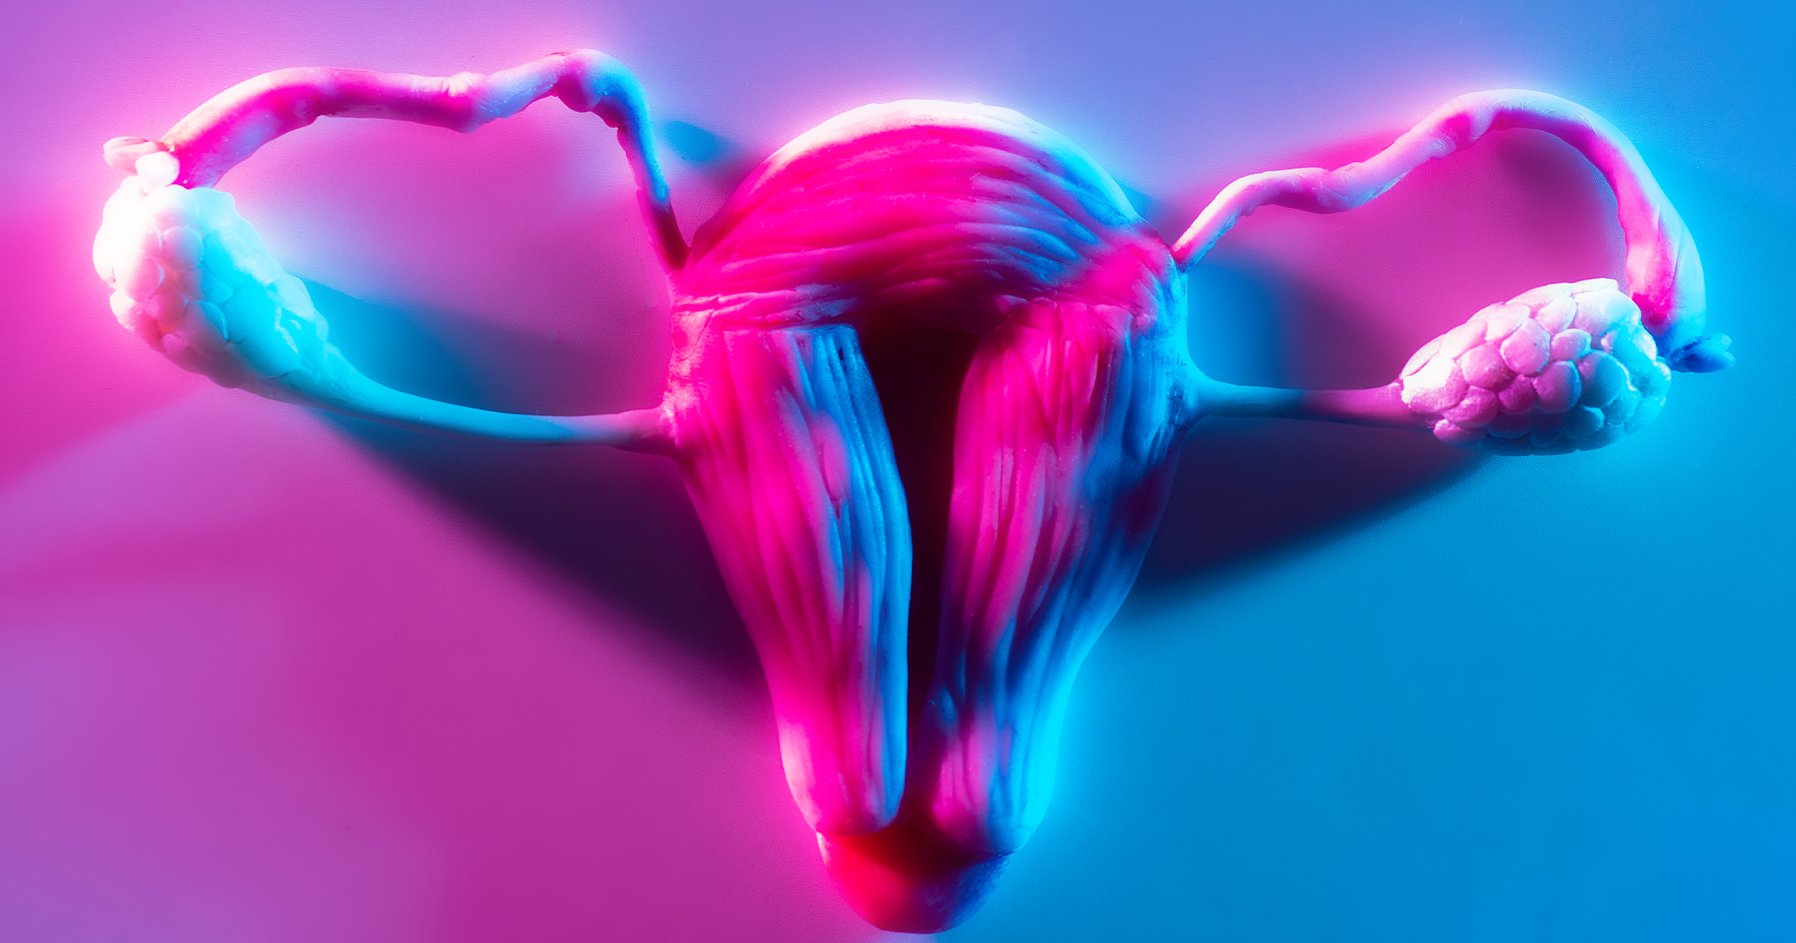 Image of female reproductive system